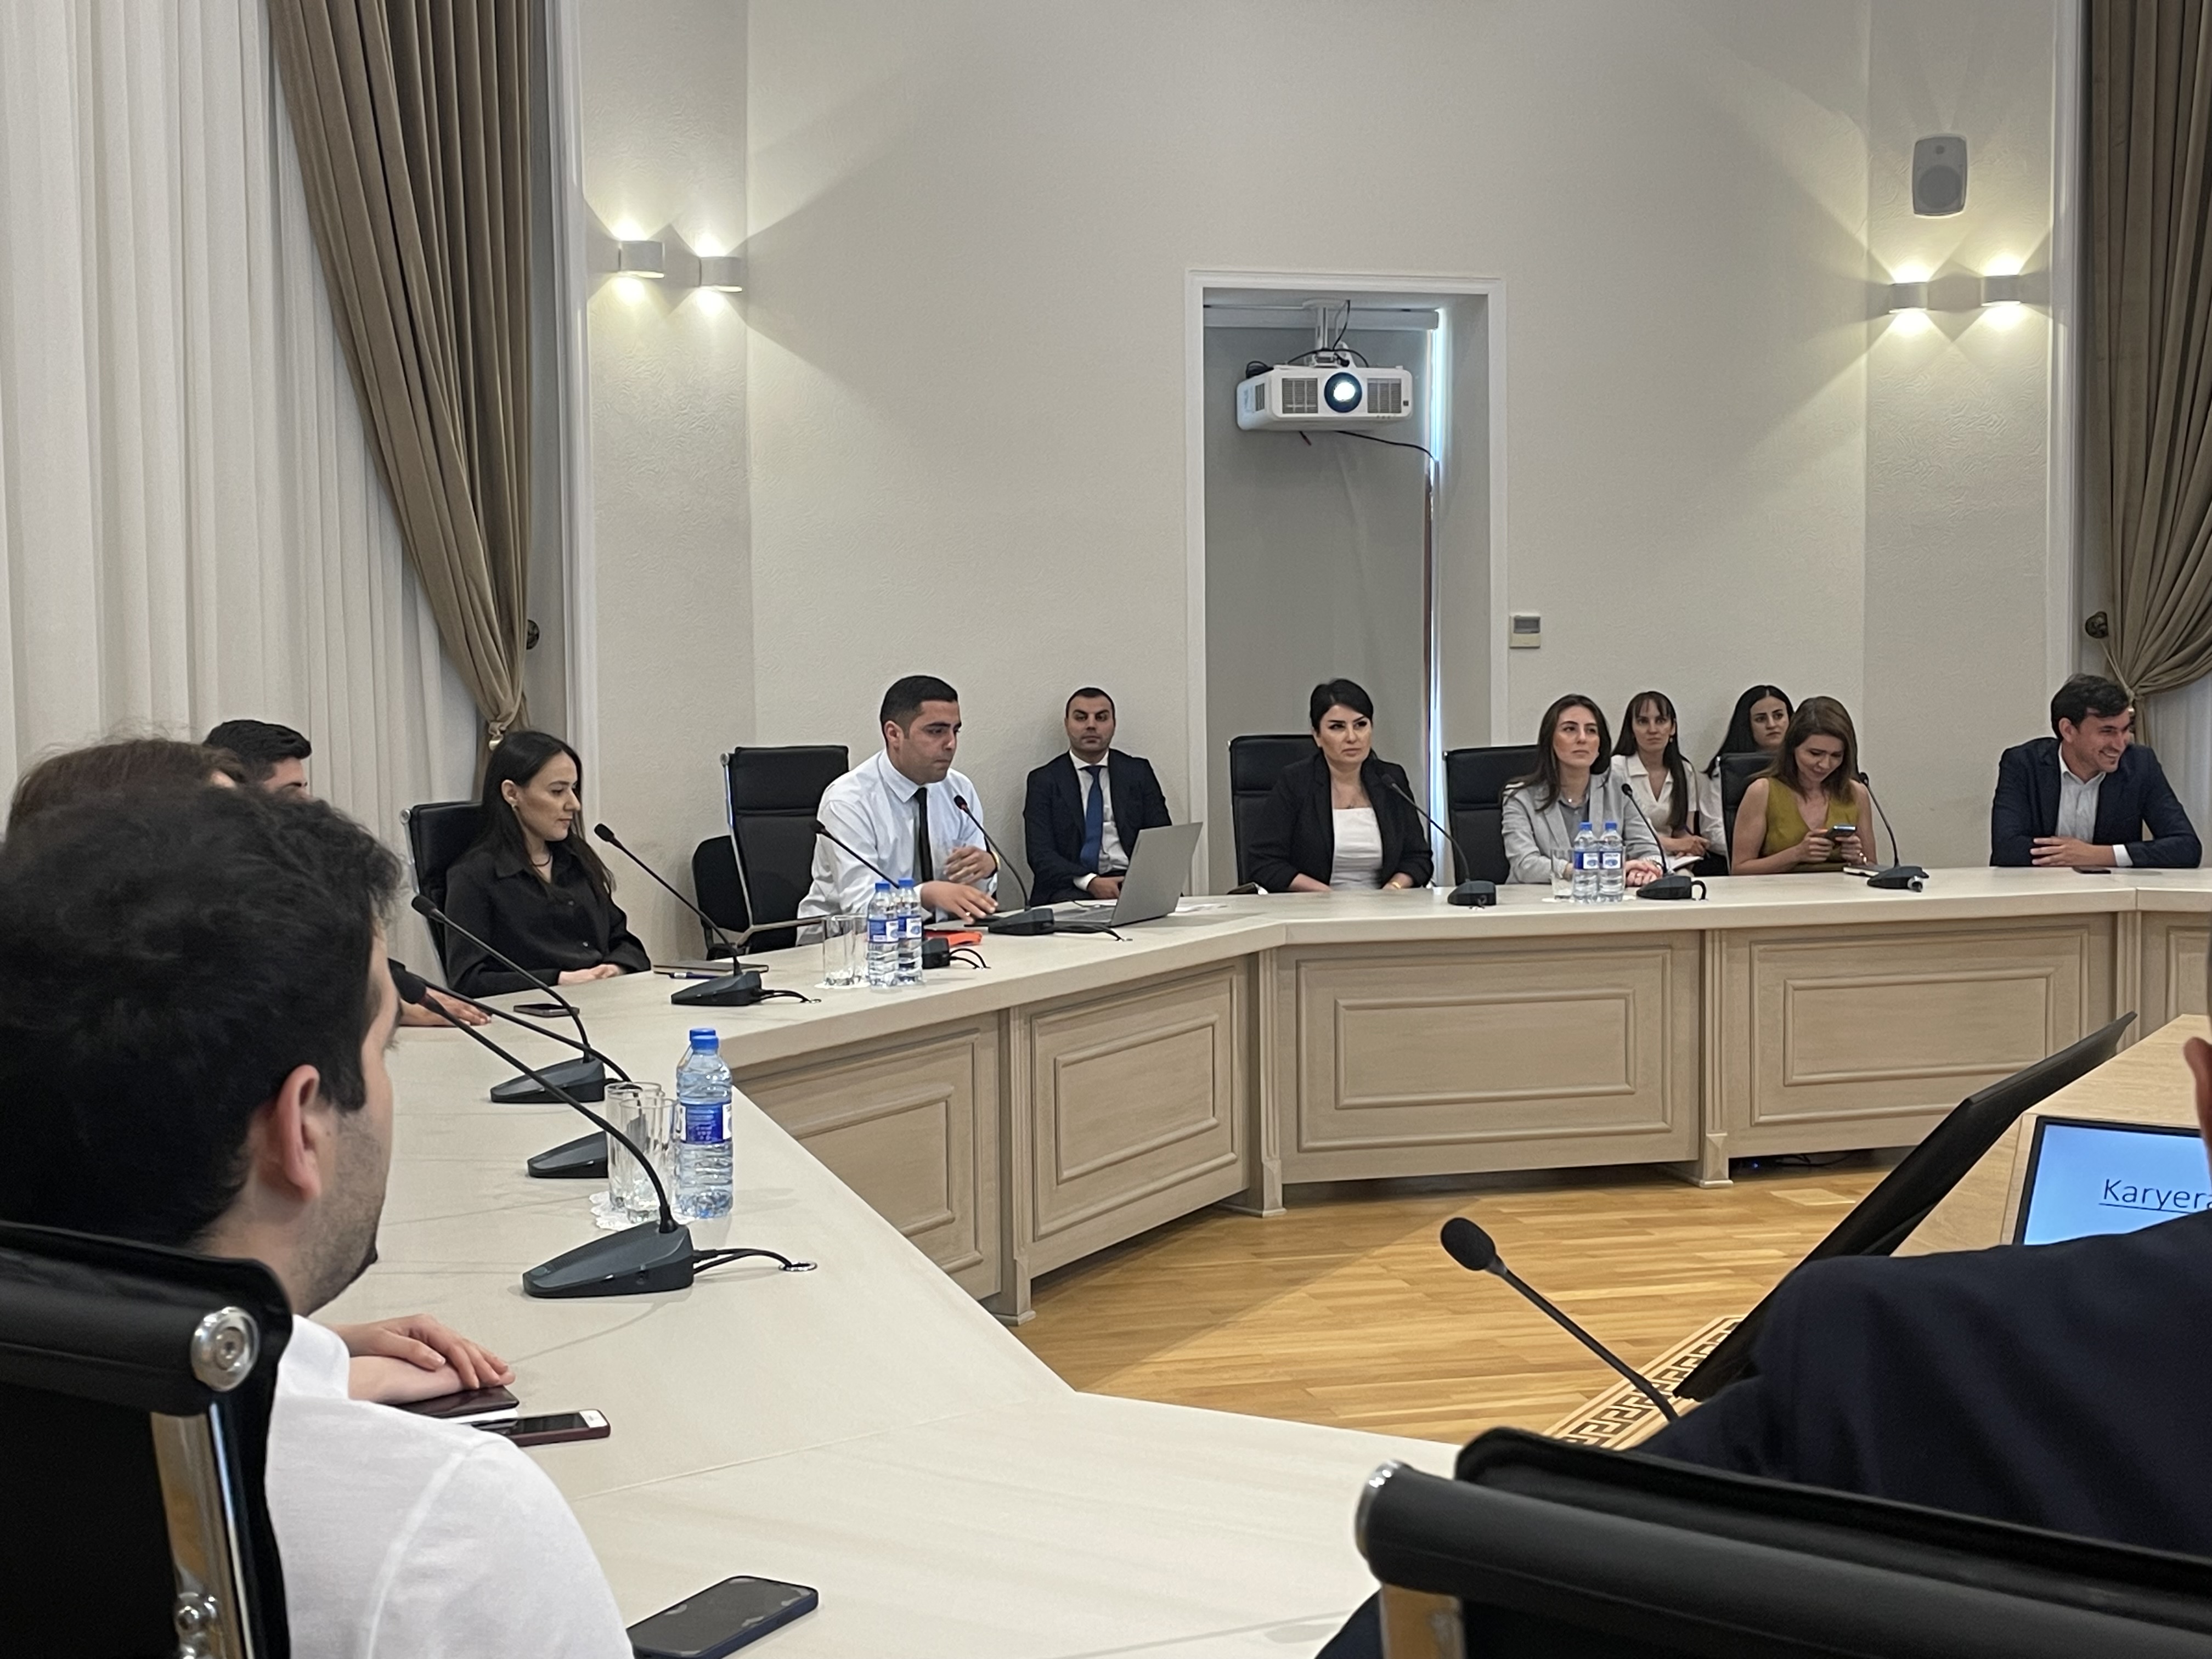 Next training was held at the Ministry of Energy